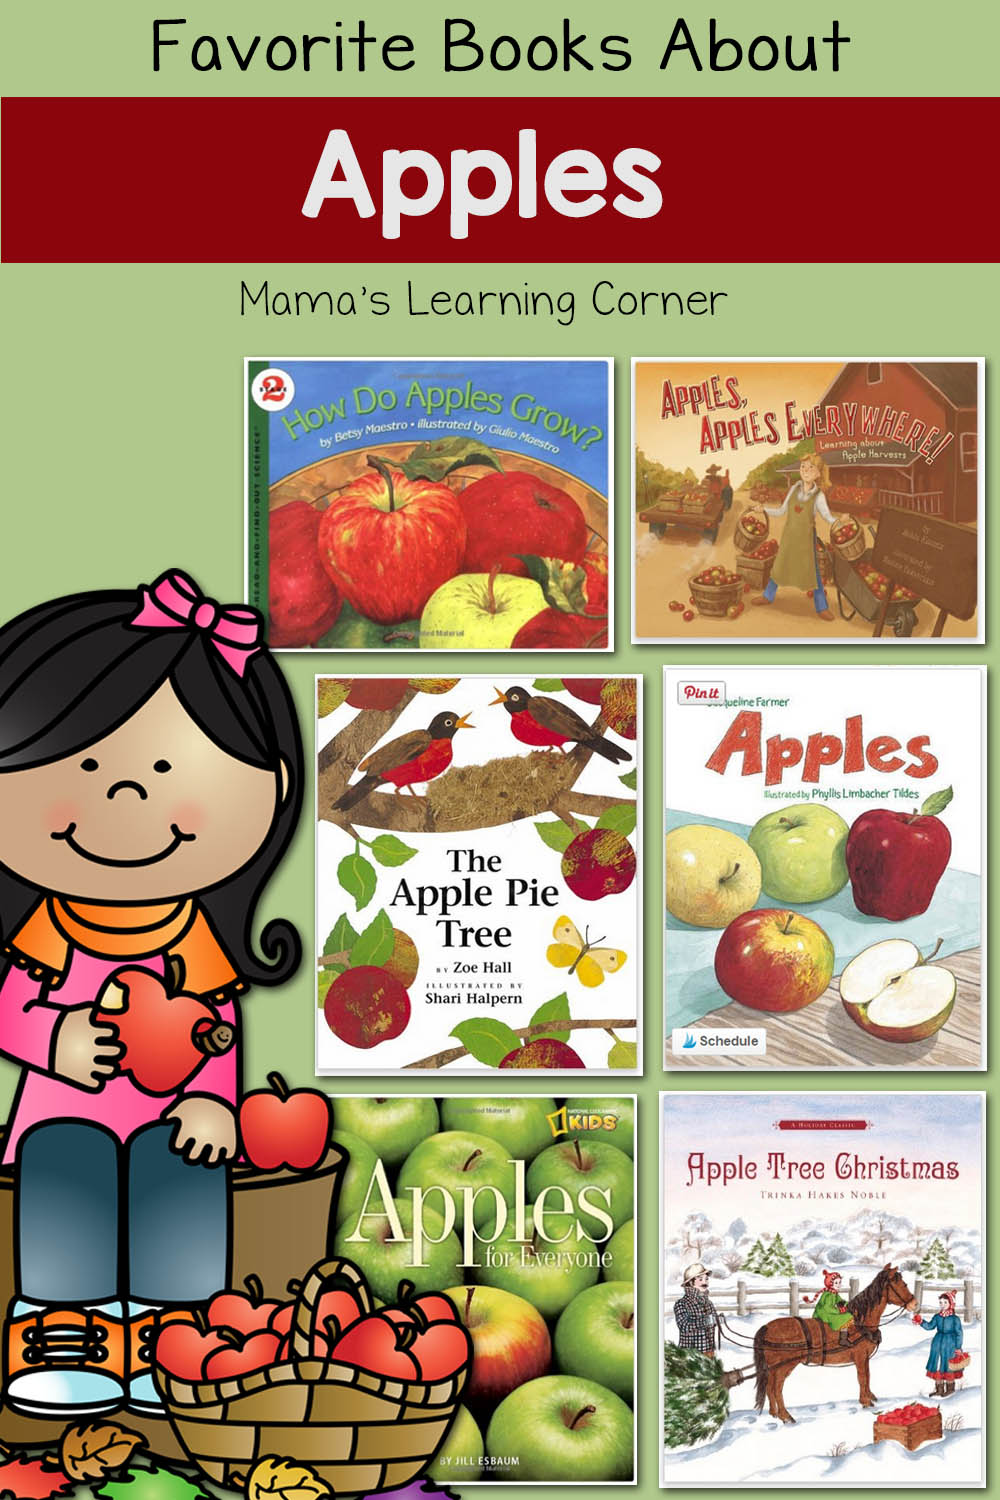 Favorite Books About Apples